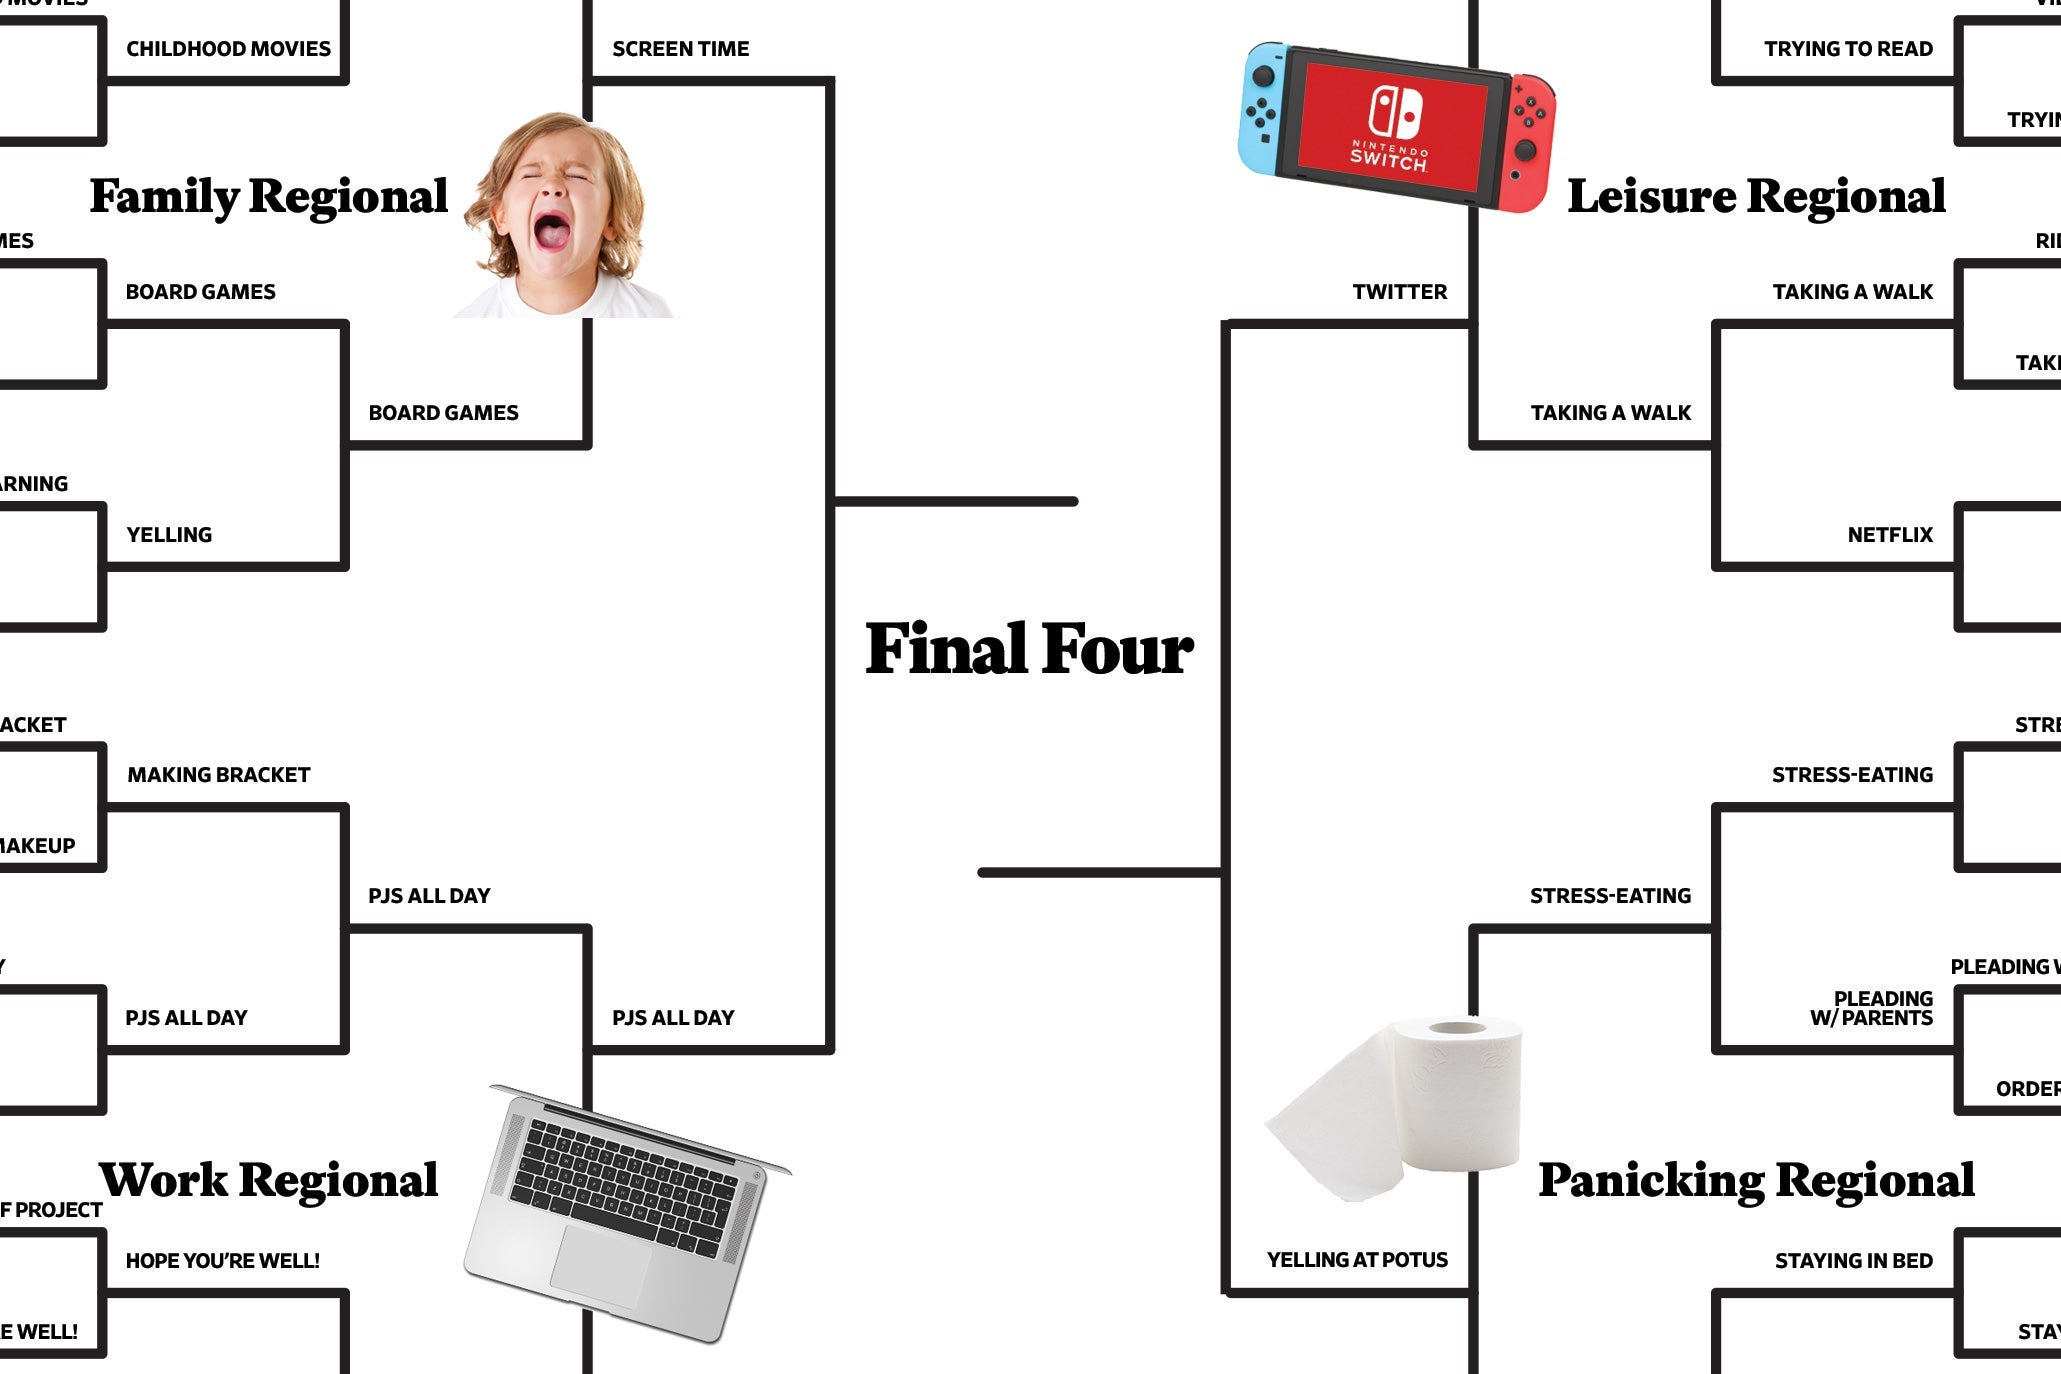 A detail of the Final Four portion of the bracket